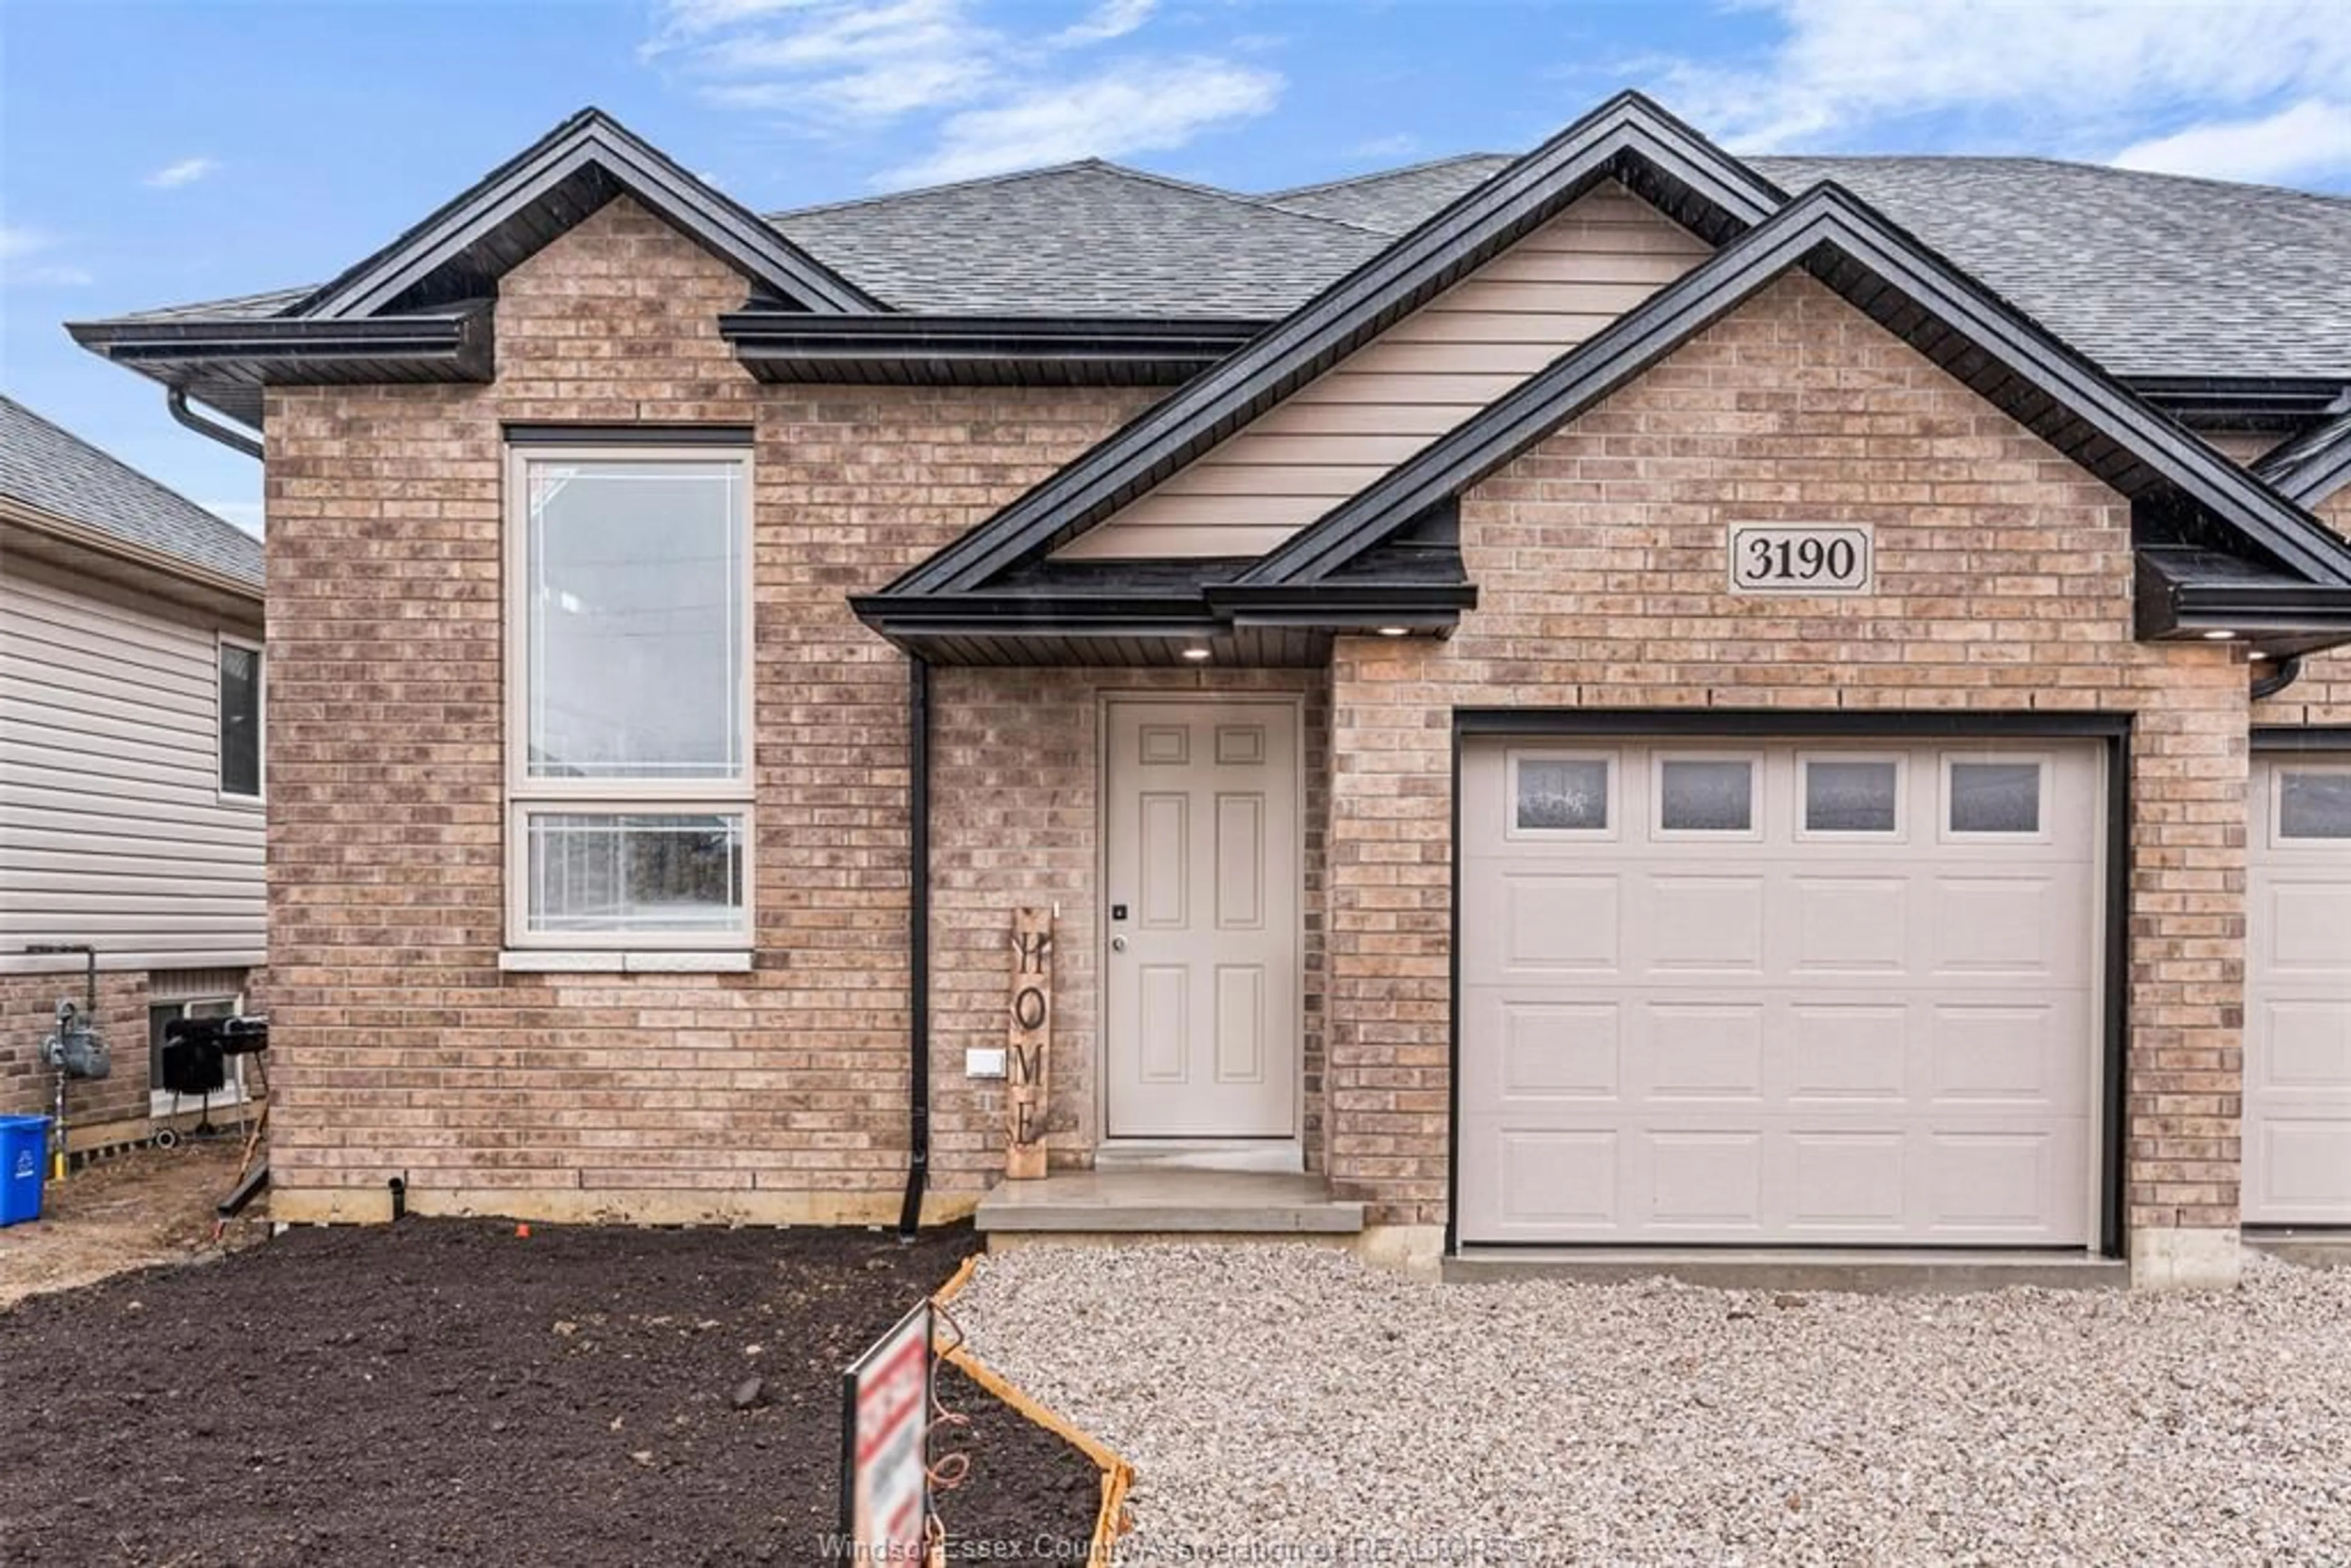 Home with brick exterior material for 3190 VIOLA Cres, Windsor Ontario N8M 0A3